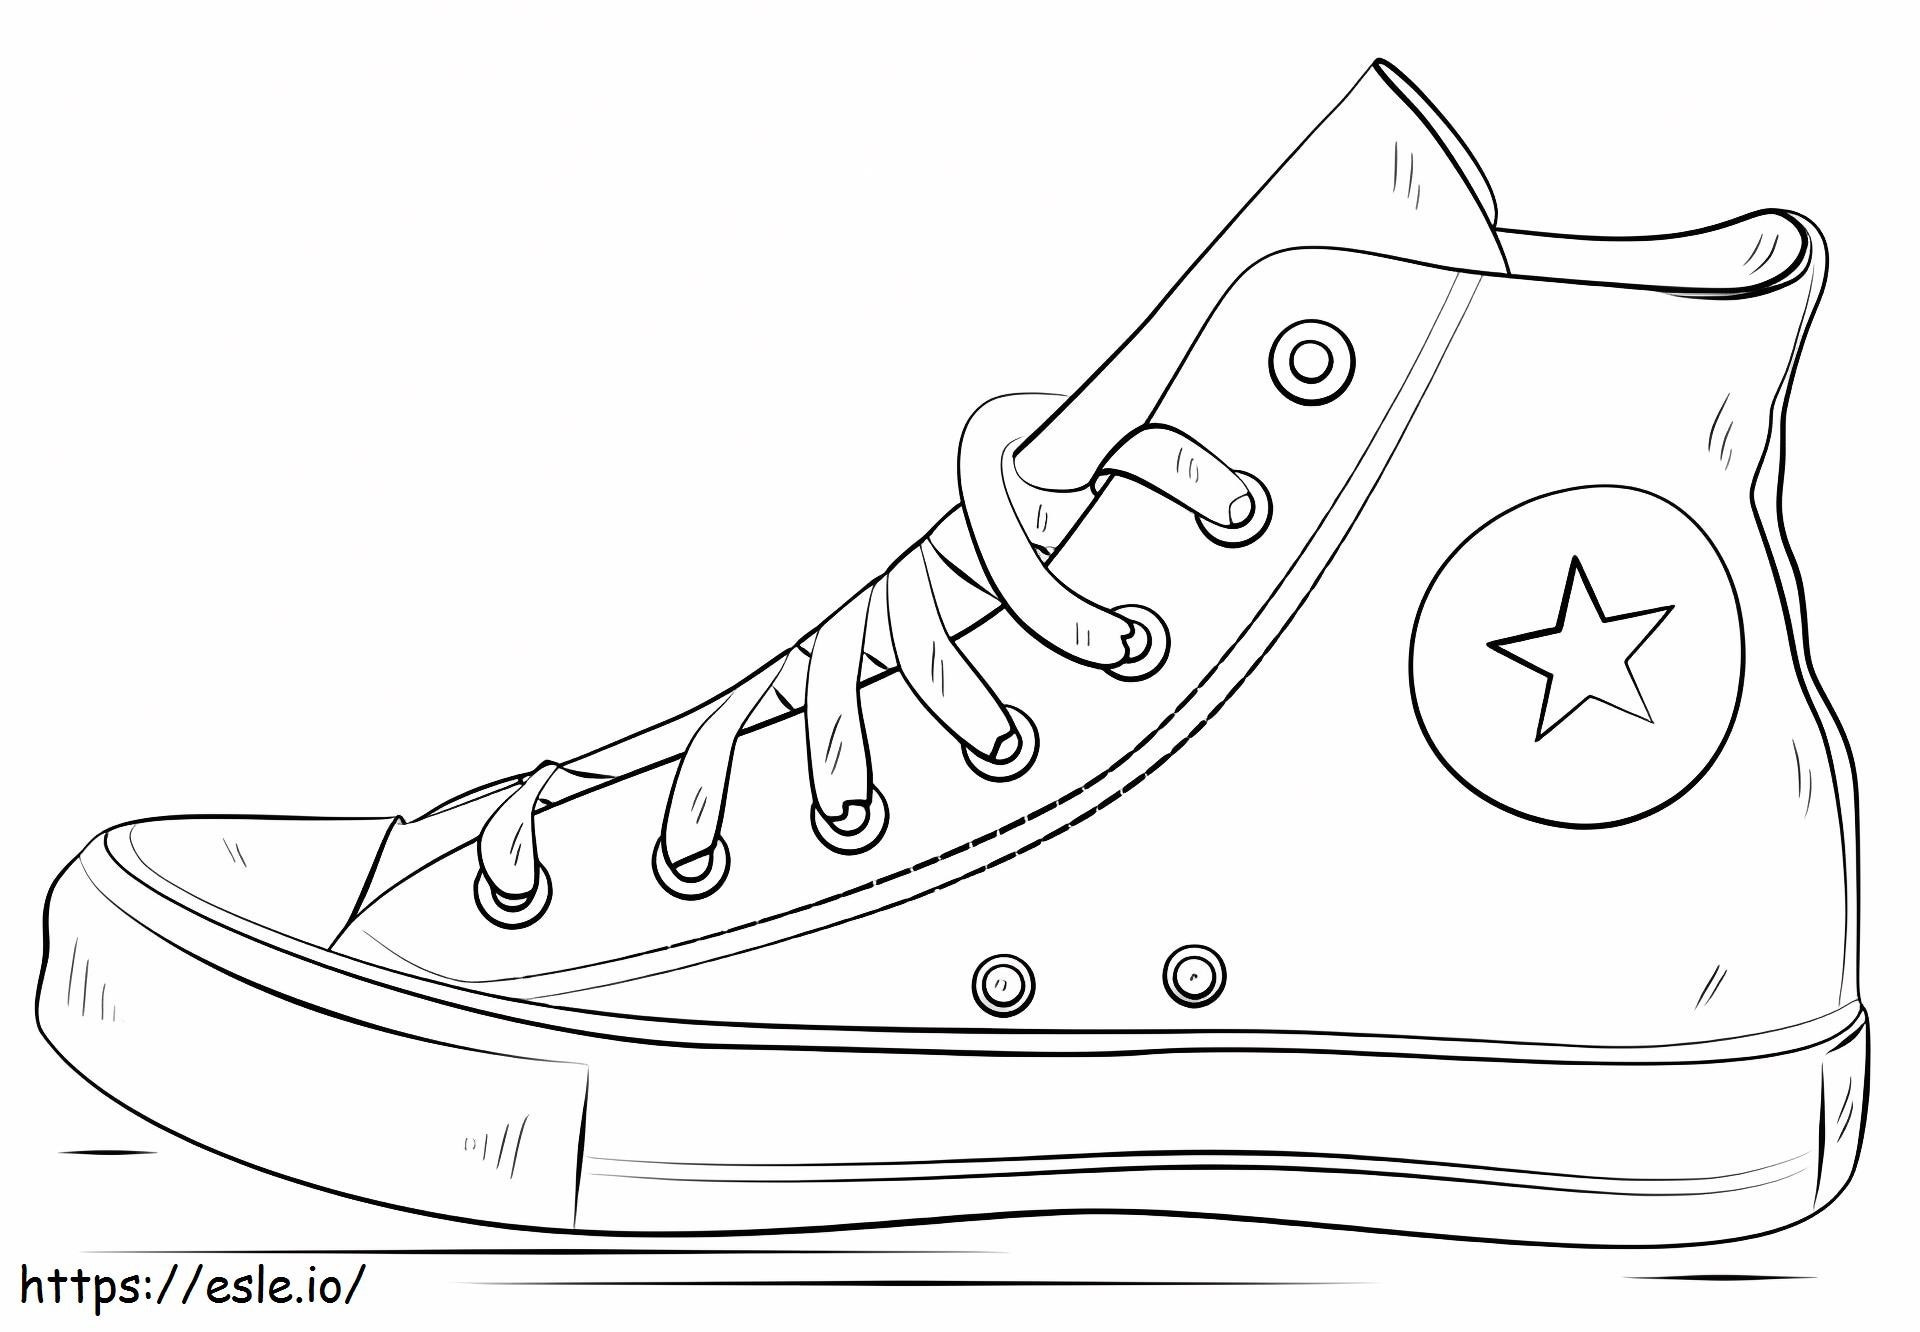 1559614444 Converse High Top A4 coloring page